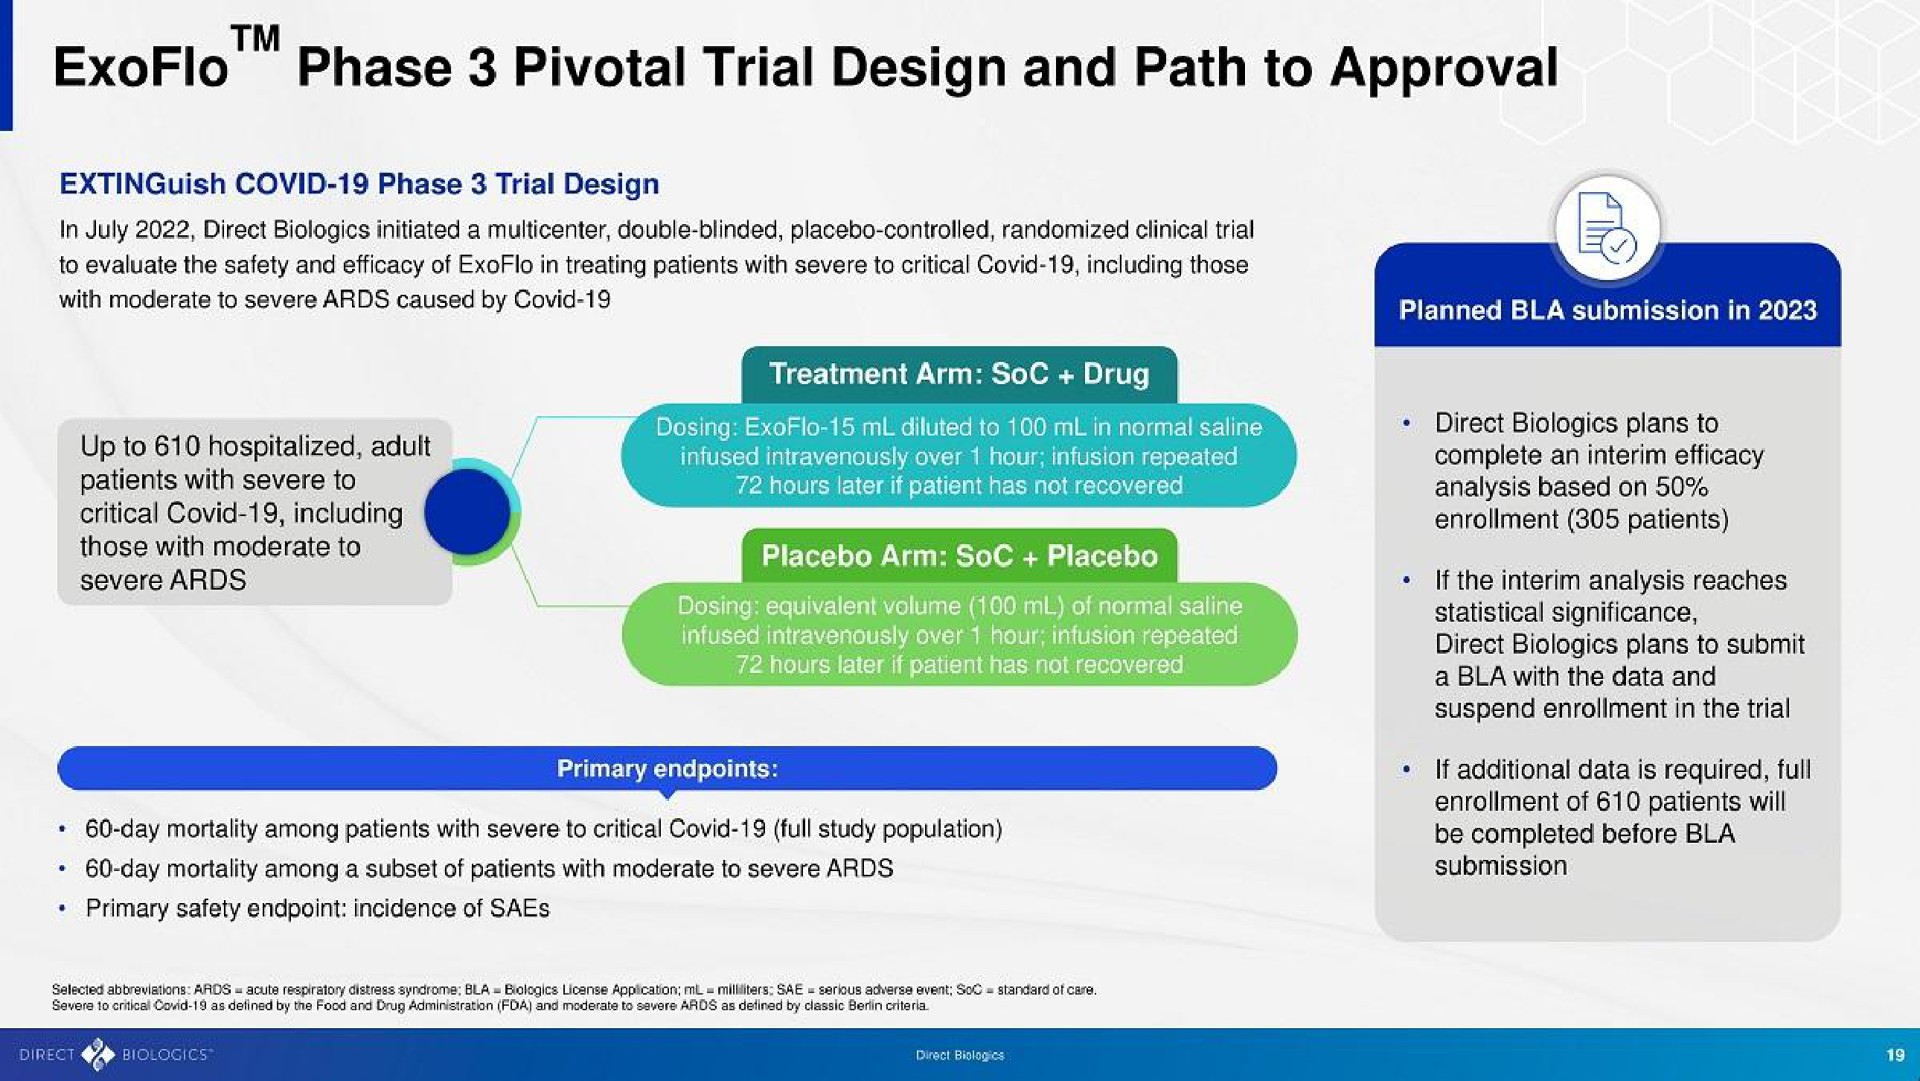 phase pivotal trial design and path to approval | Direct Biologics